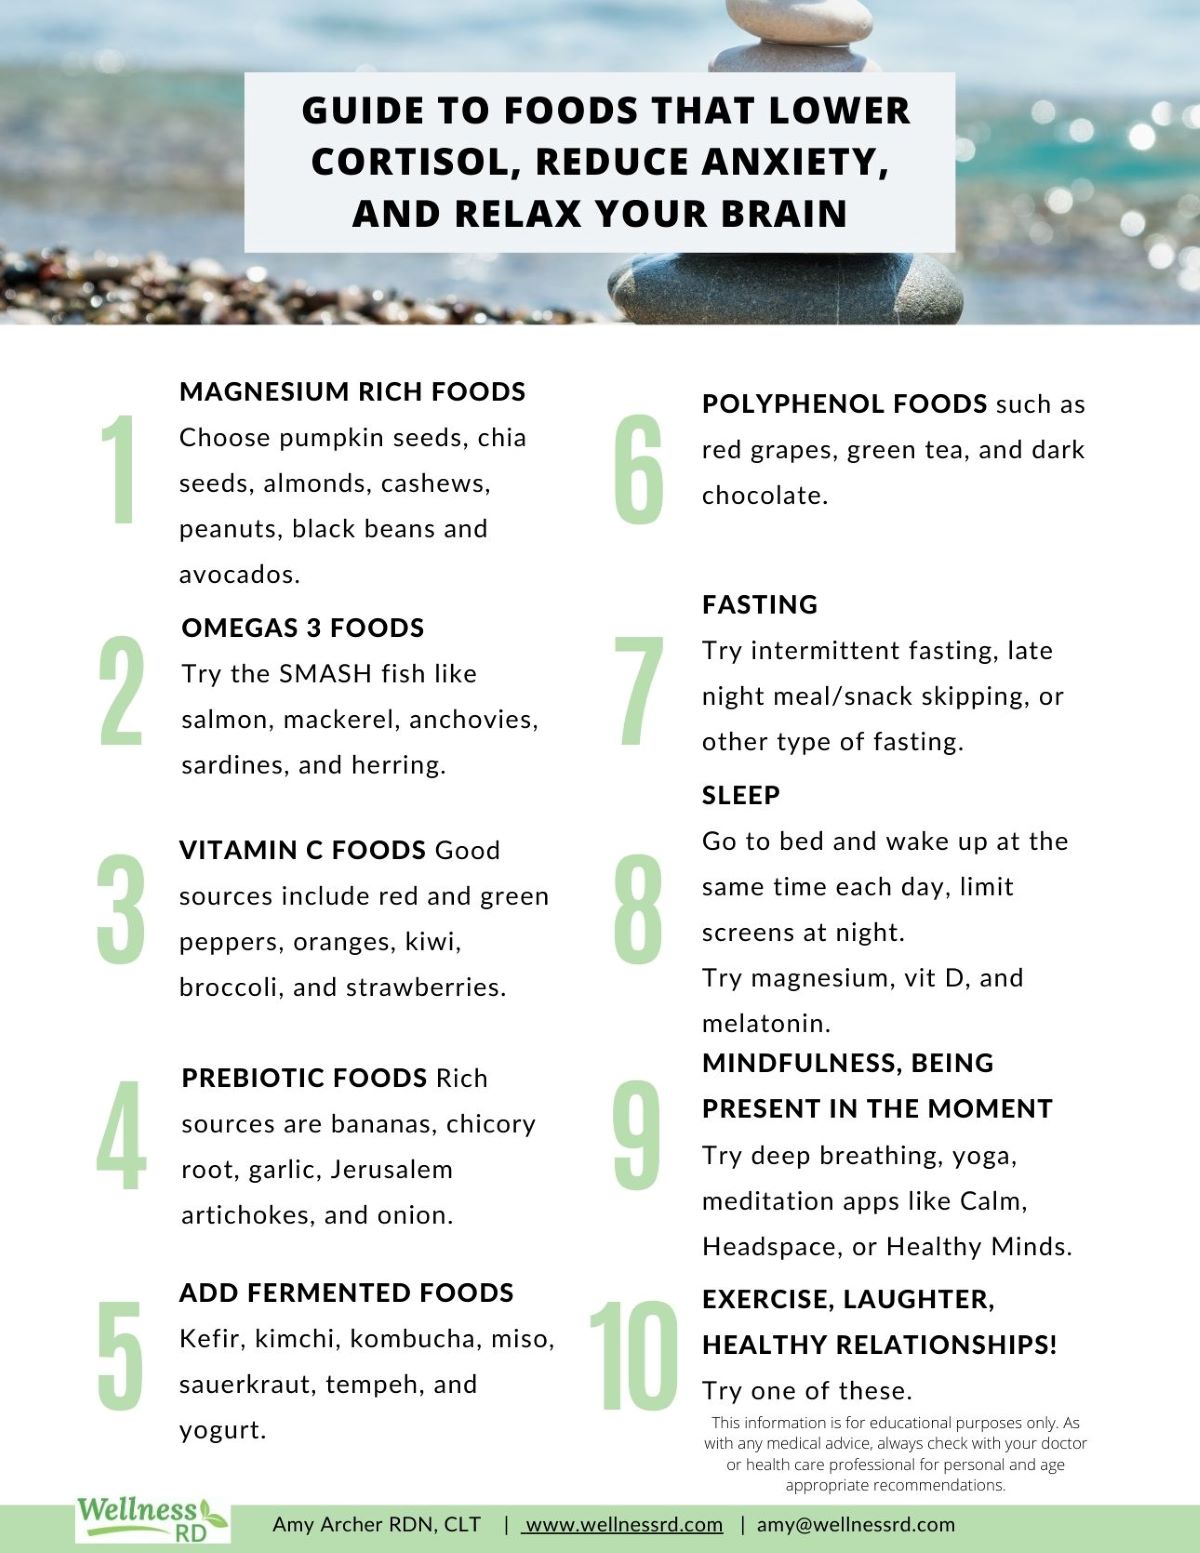 Guide to Foods That Lower Cortisol, Reduce Anxiety, and Relax Your Brain